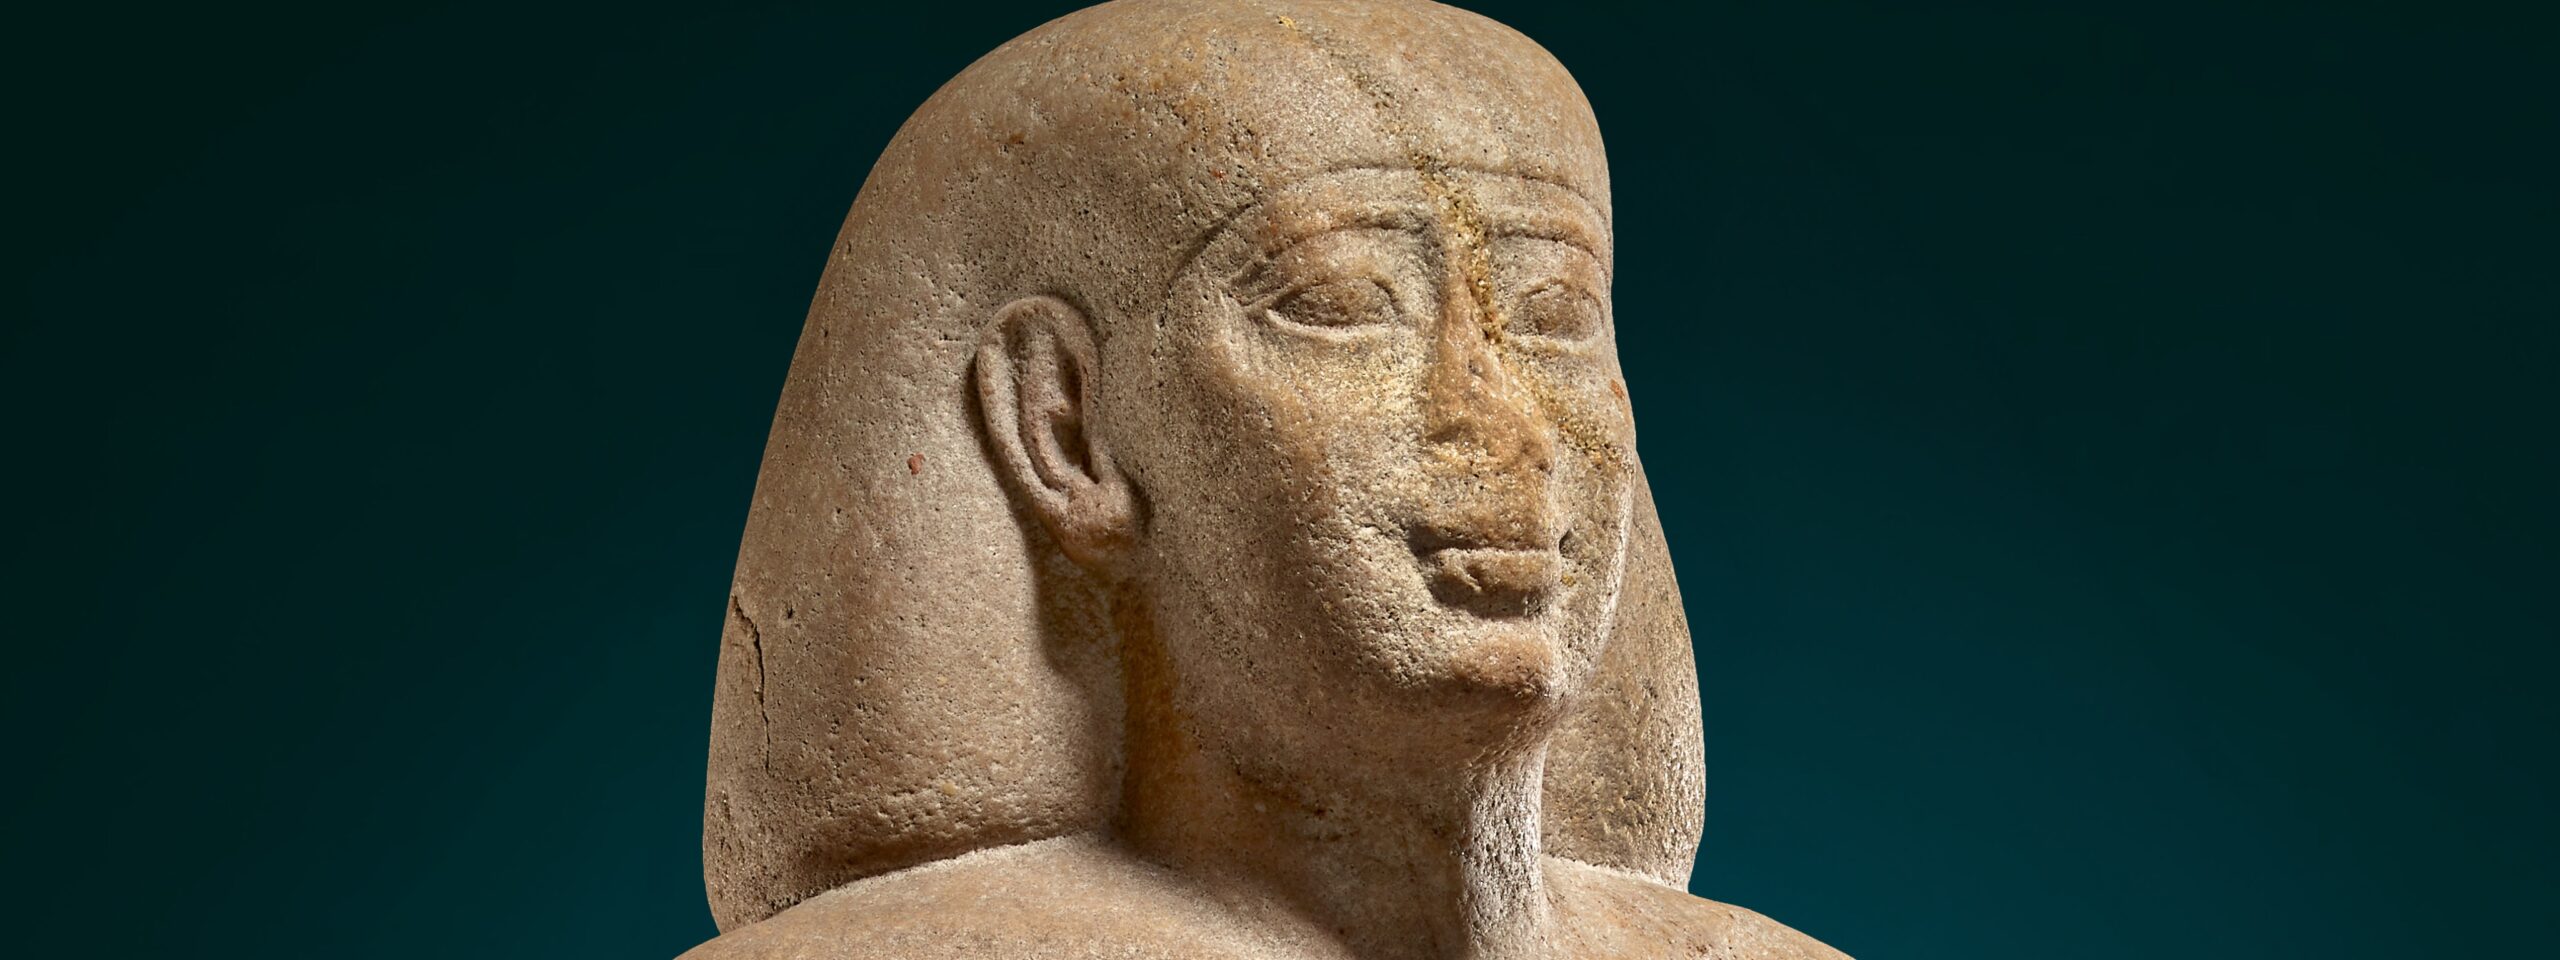 * Sculpted Portraits from Ancient Egypt